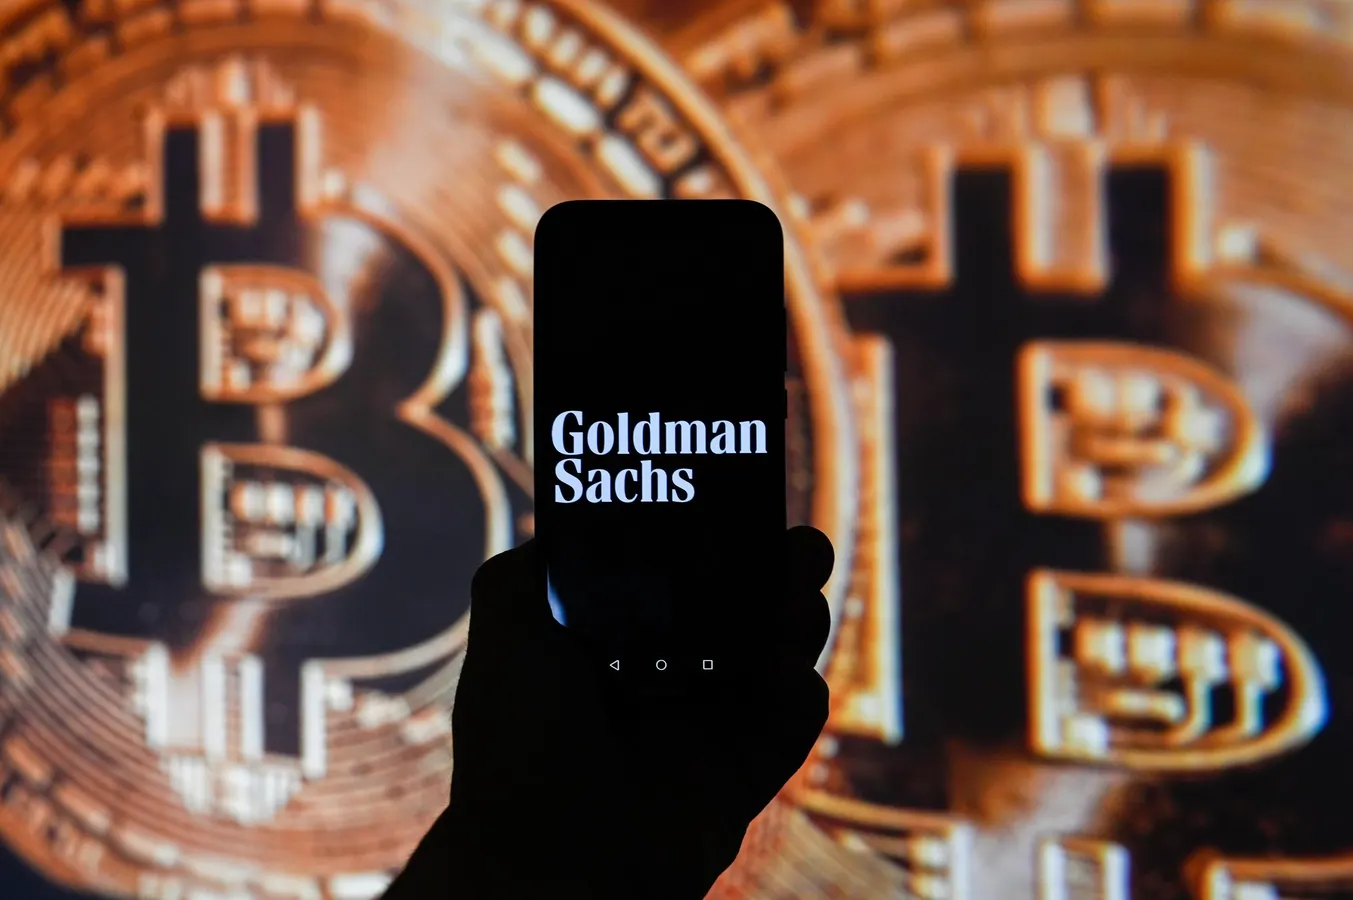 Crypto Critique: Goldman Sachs Stance and Bitcoin’s Rise